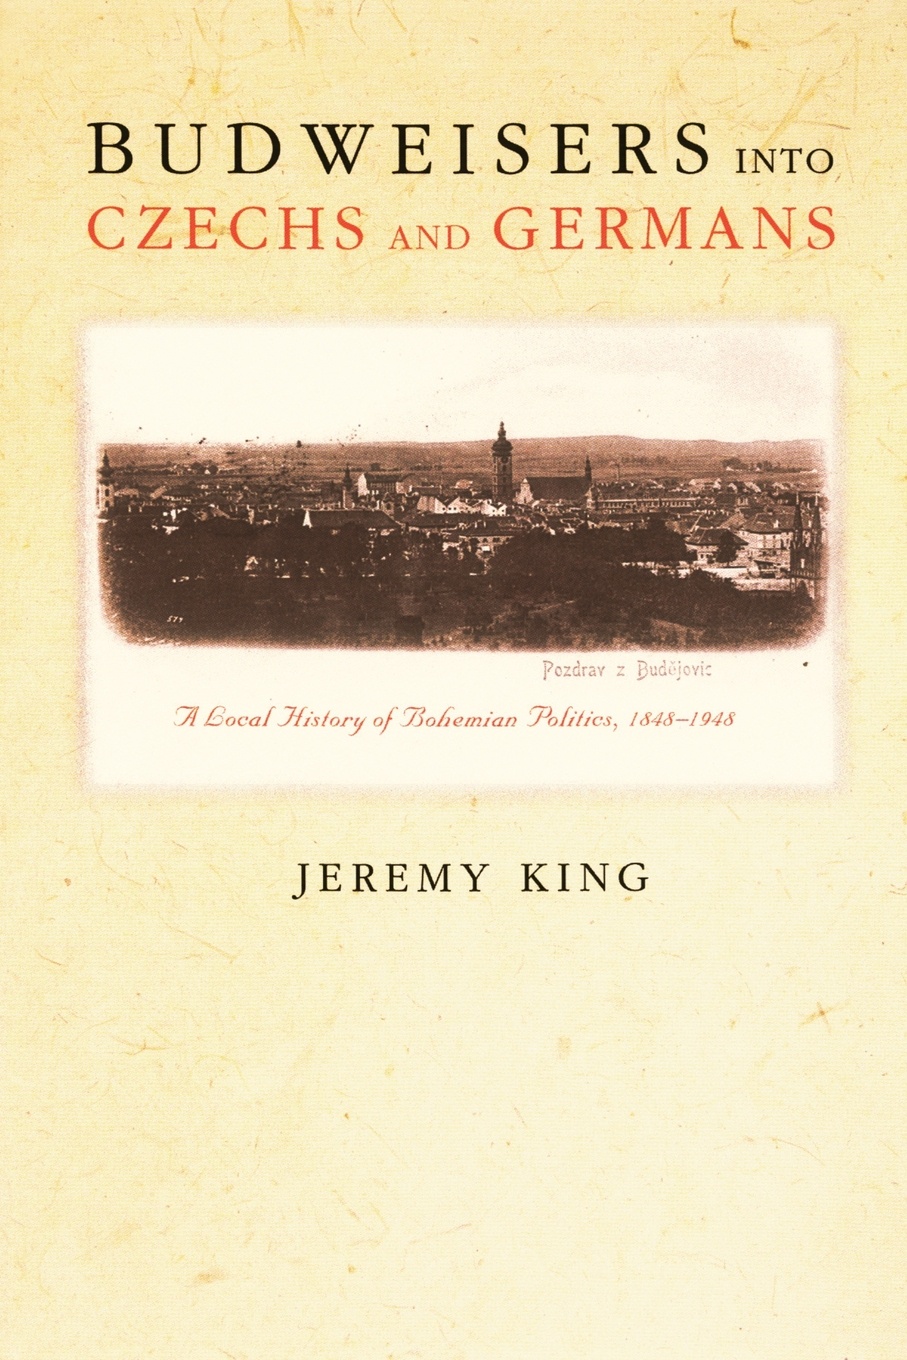 Budweisers into Czechs and Germans. A Local History of Bohemian Politics, 1848-1948